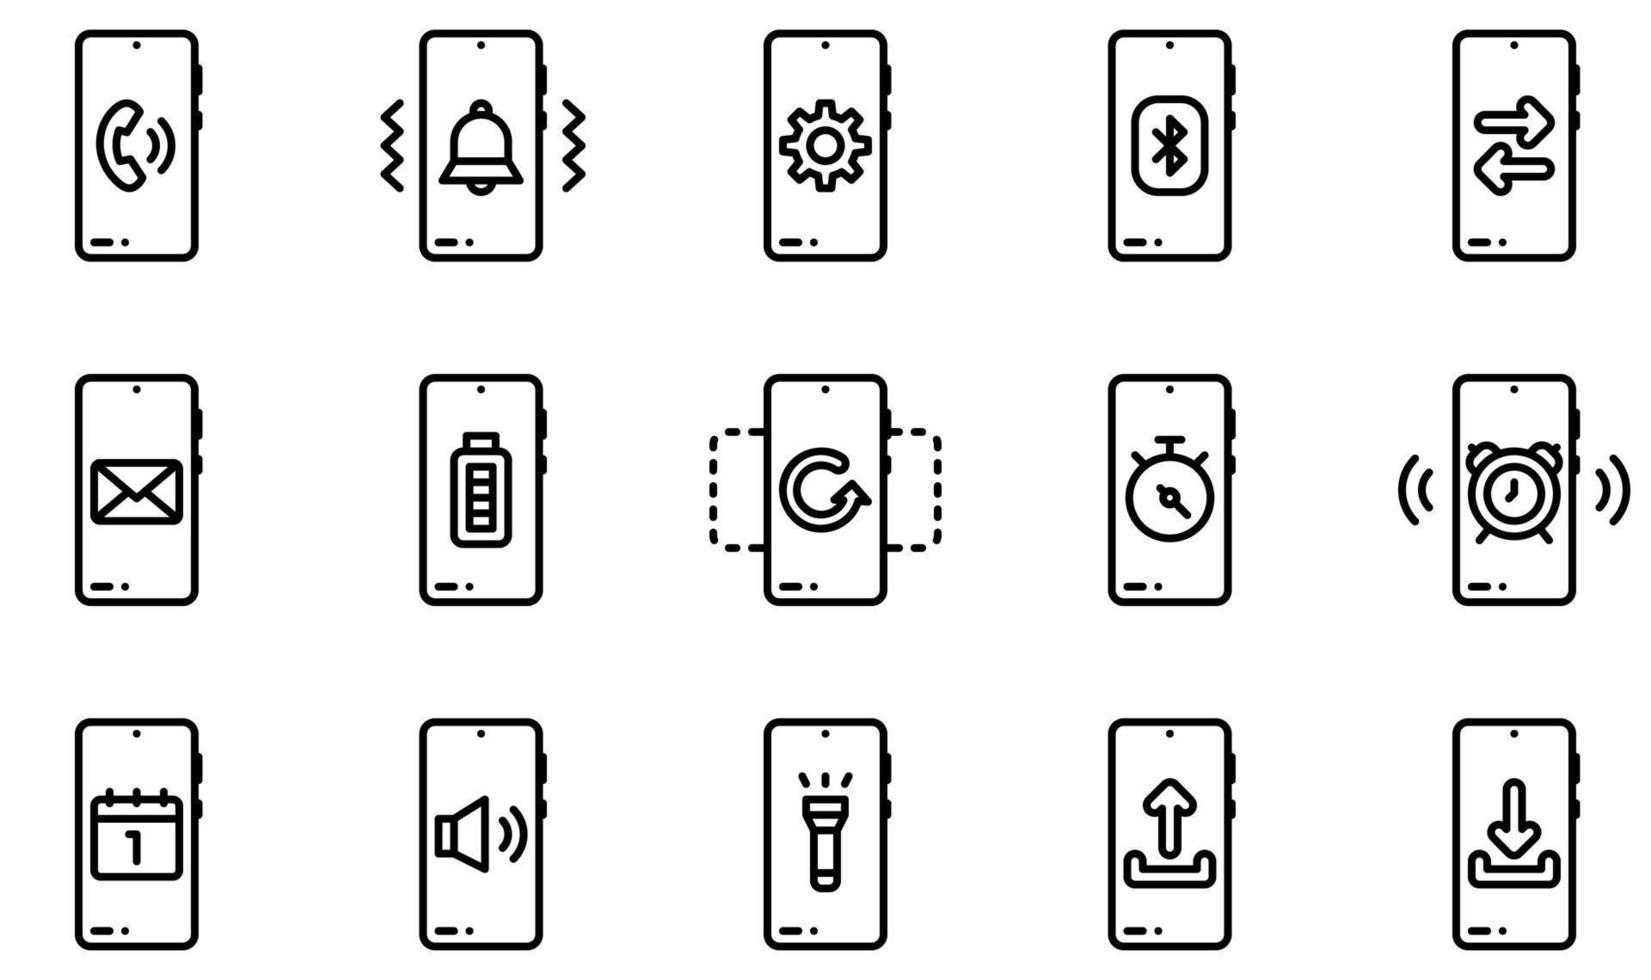 Set of Vector Icons Related to Mobile Functions. Contains such Icons as Alarm Clock, Barcode, Bluetooth, Calendar, Charging, Email and more.